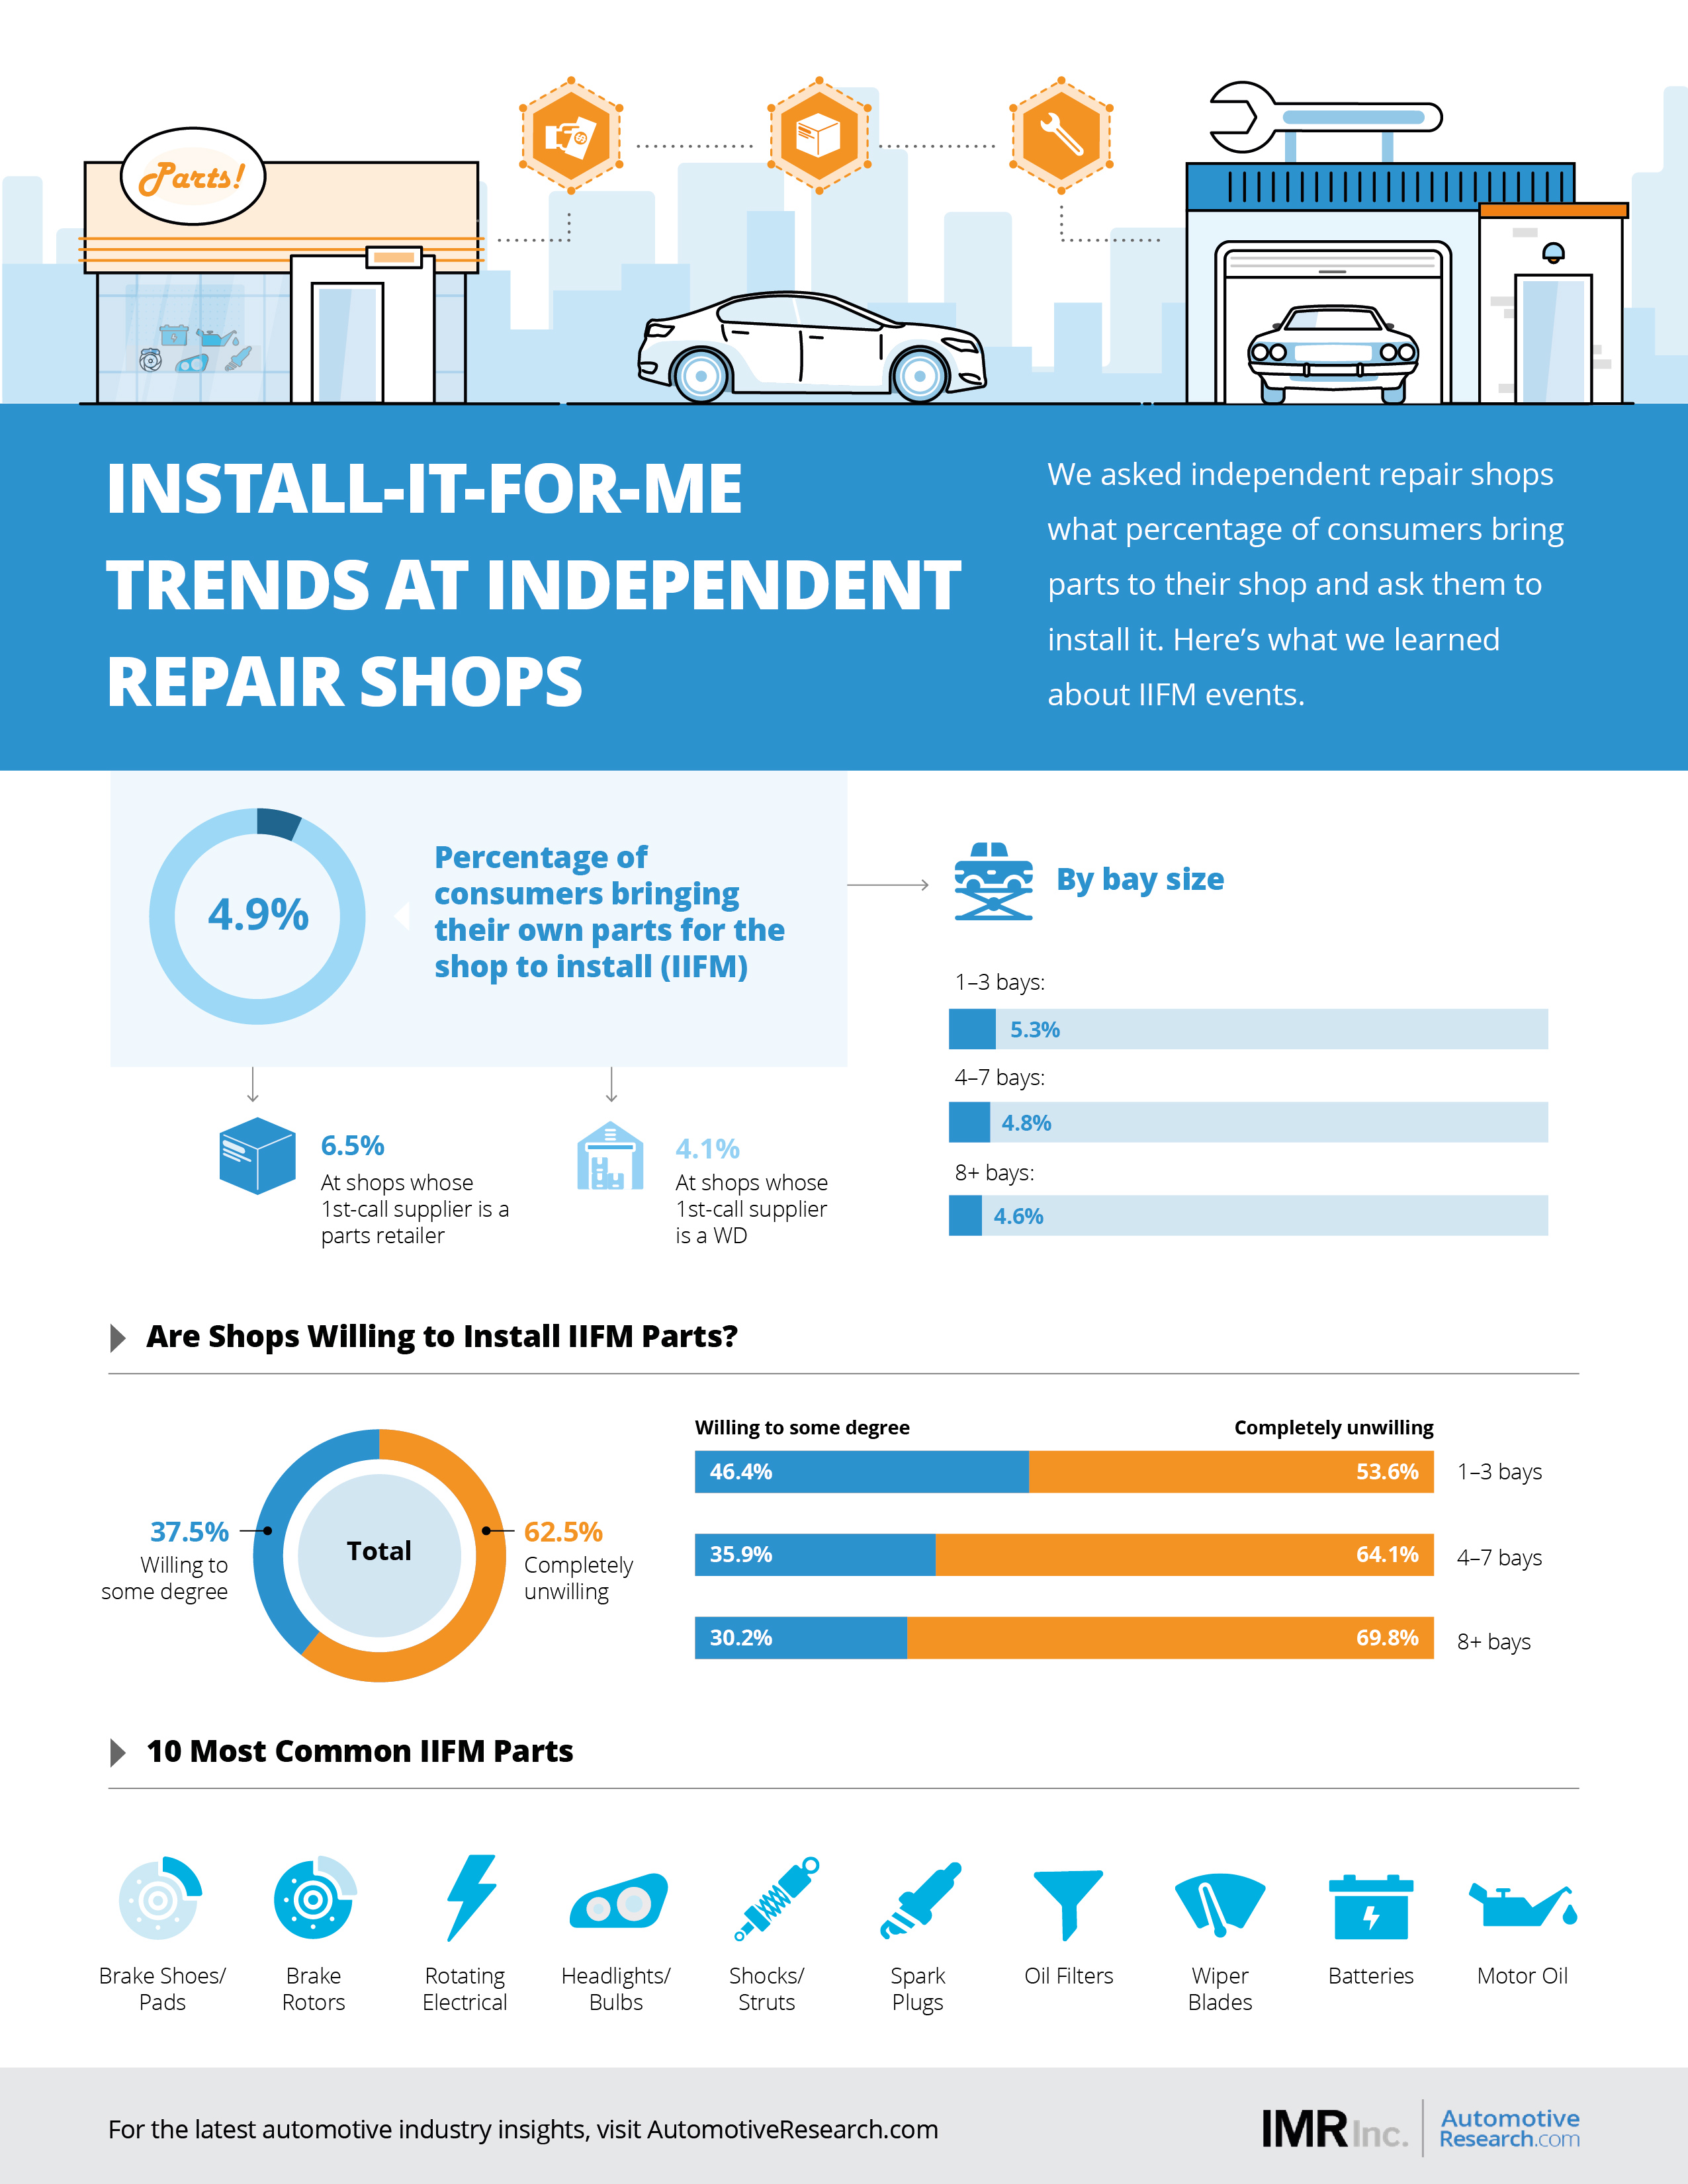 IMR Automotive Market Research Auto Repair Shops Install-It-For-Me Trends Infographic